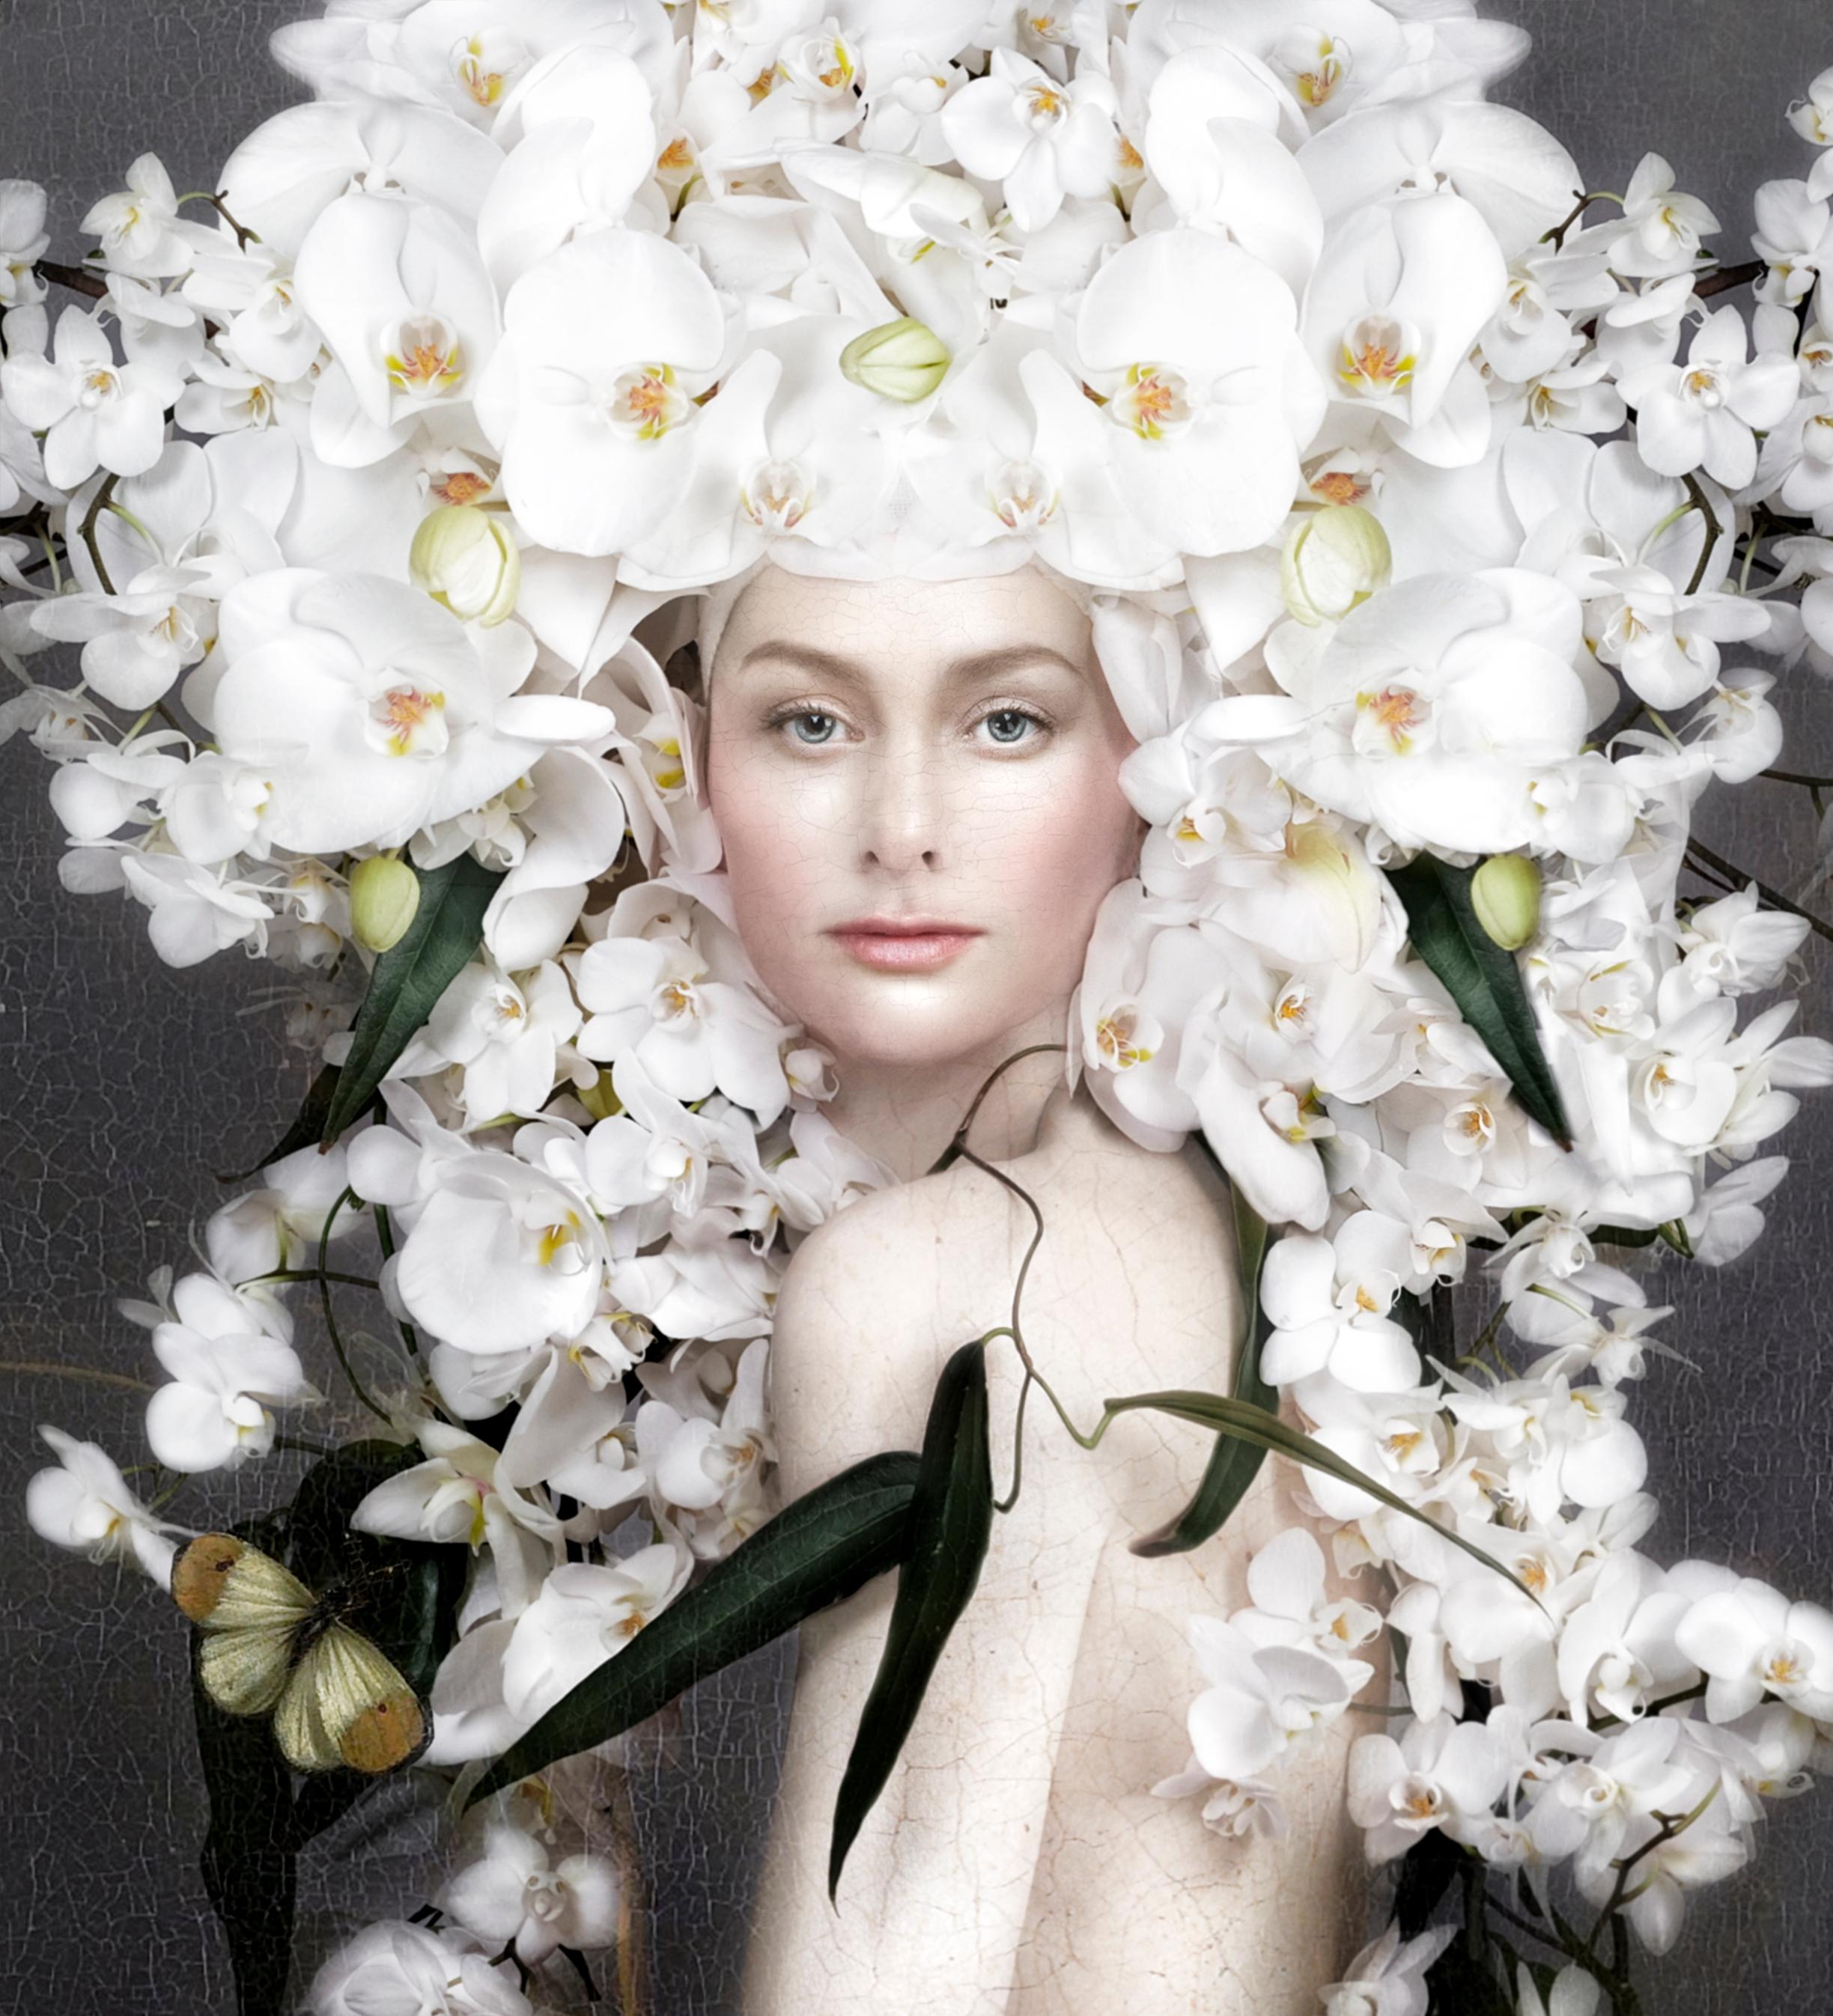 Rebirth Portrait
C-print on Fuji Paper
Collection: THE REBIRTH OF THE DUTCH FLOWER
One size: 44.5 x 40.5
Edition of 8 + 2 Artist Proofs

THE REBIRTH OF THE DUTCH FLOWER COLLECTION
Isabelle van Zeijl has turned her eye on 400 million flowers